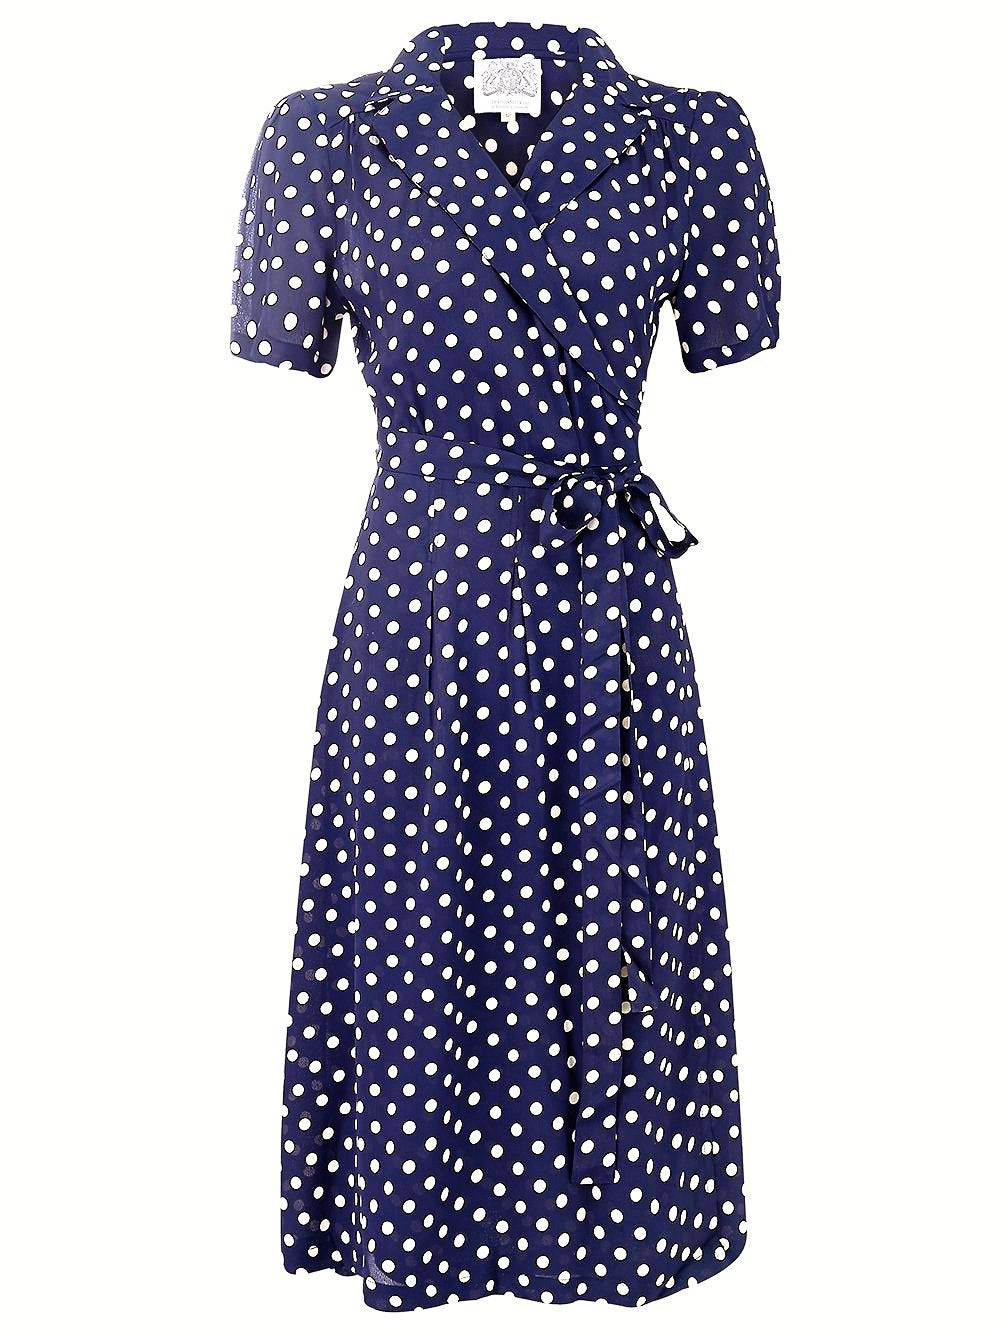 "Peggy" Wrap Dress in Navy with Polka Dot Spot, Classic The 1940s Vintage Inspired Style - True and authentic vintage style clothing, inspired by the Classic styles of CC41 , WW2 and the fun 1950s RocknRoll era, for everyday wear plus events like Goodwood Revival, Twinwood Festival and Viva Las Vegas Rockabilly Weekend Rock n Romance The Seamstress of Bloomsbury